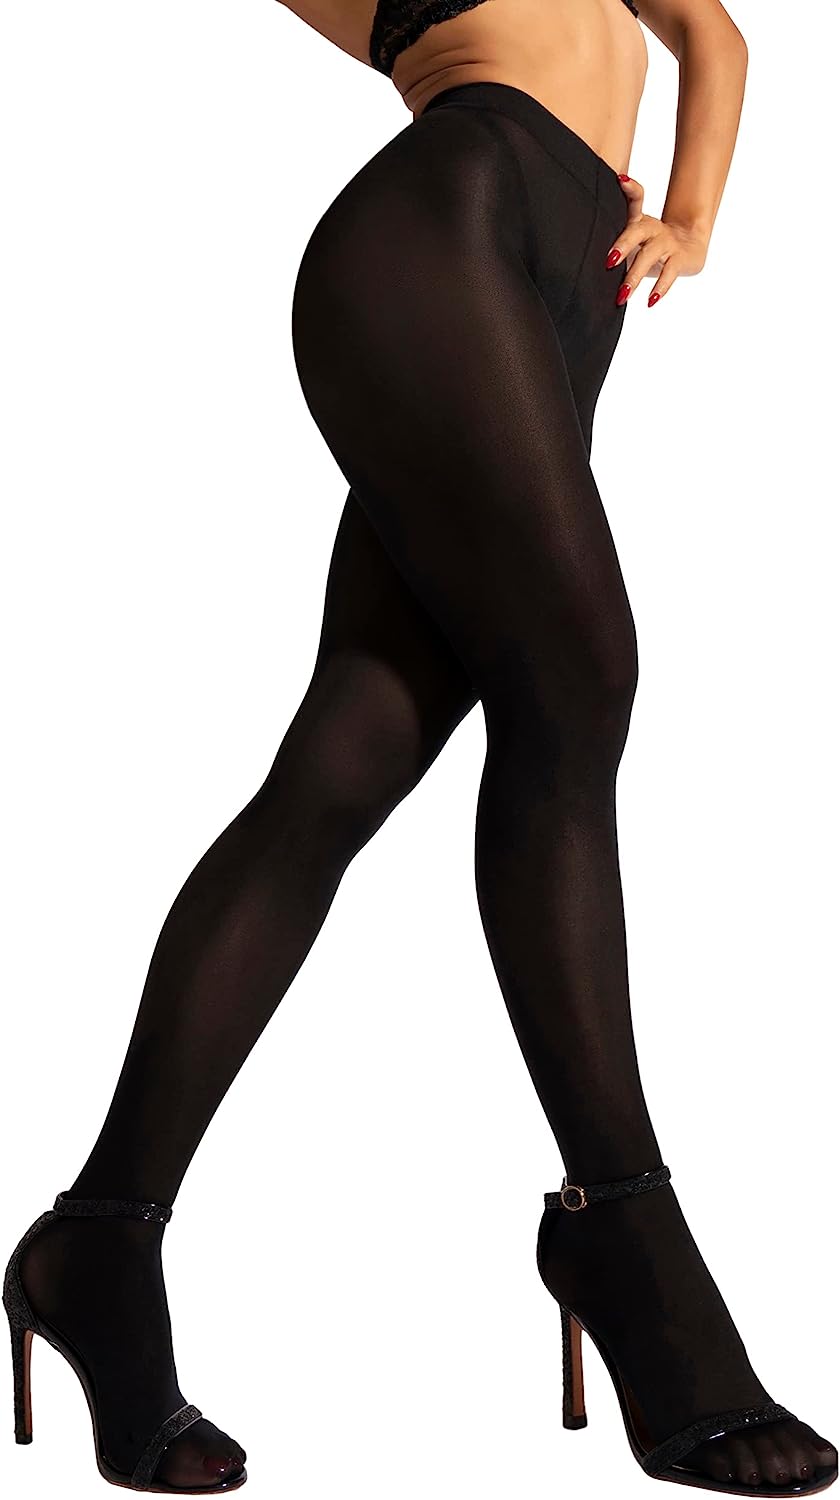  Sofsy Brown Tights For Women Opaque Tights